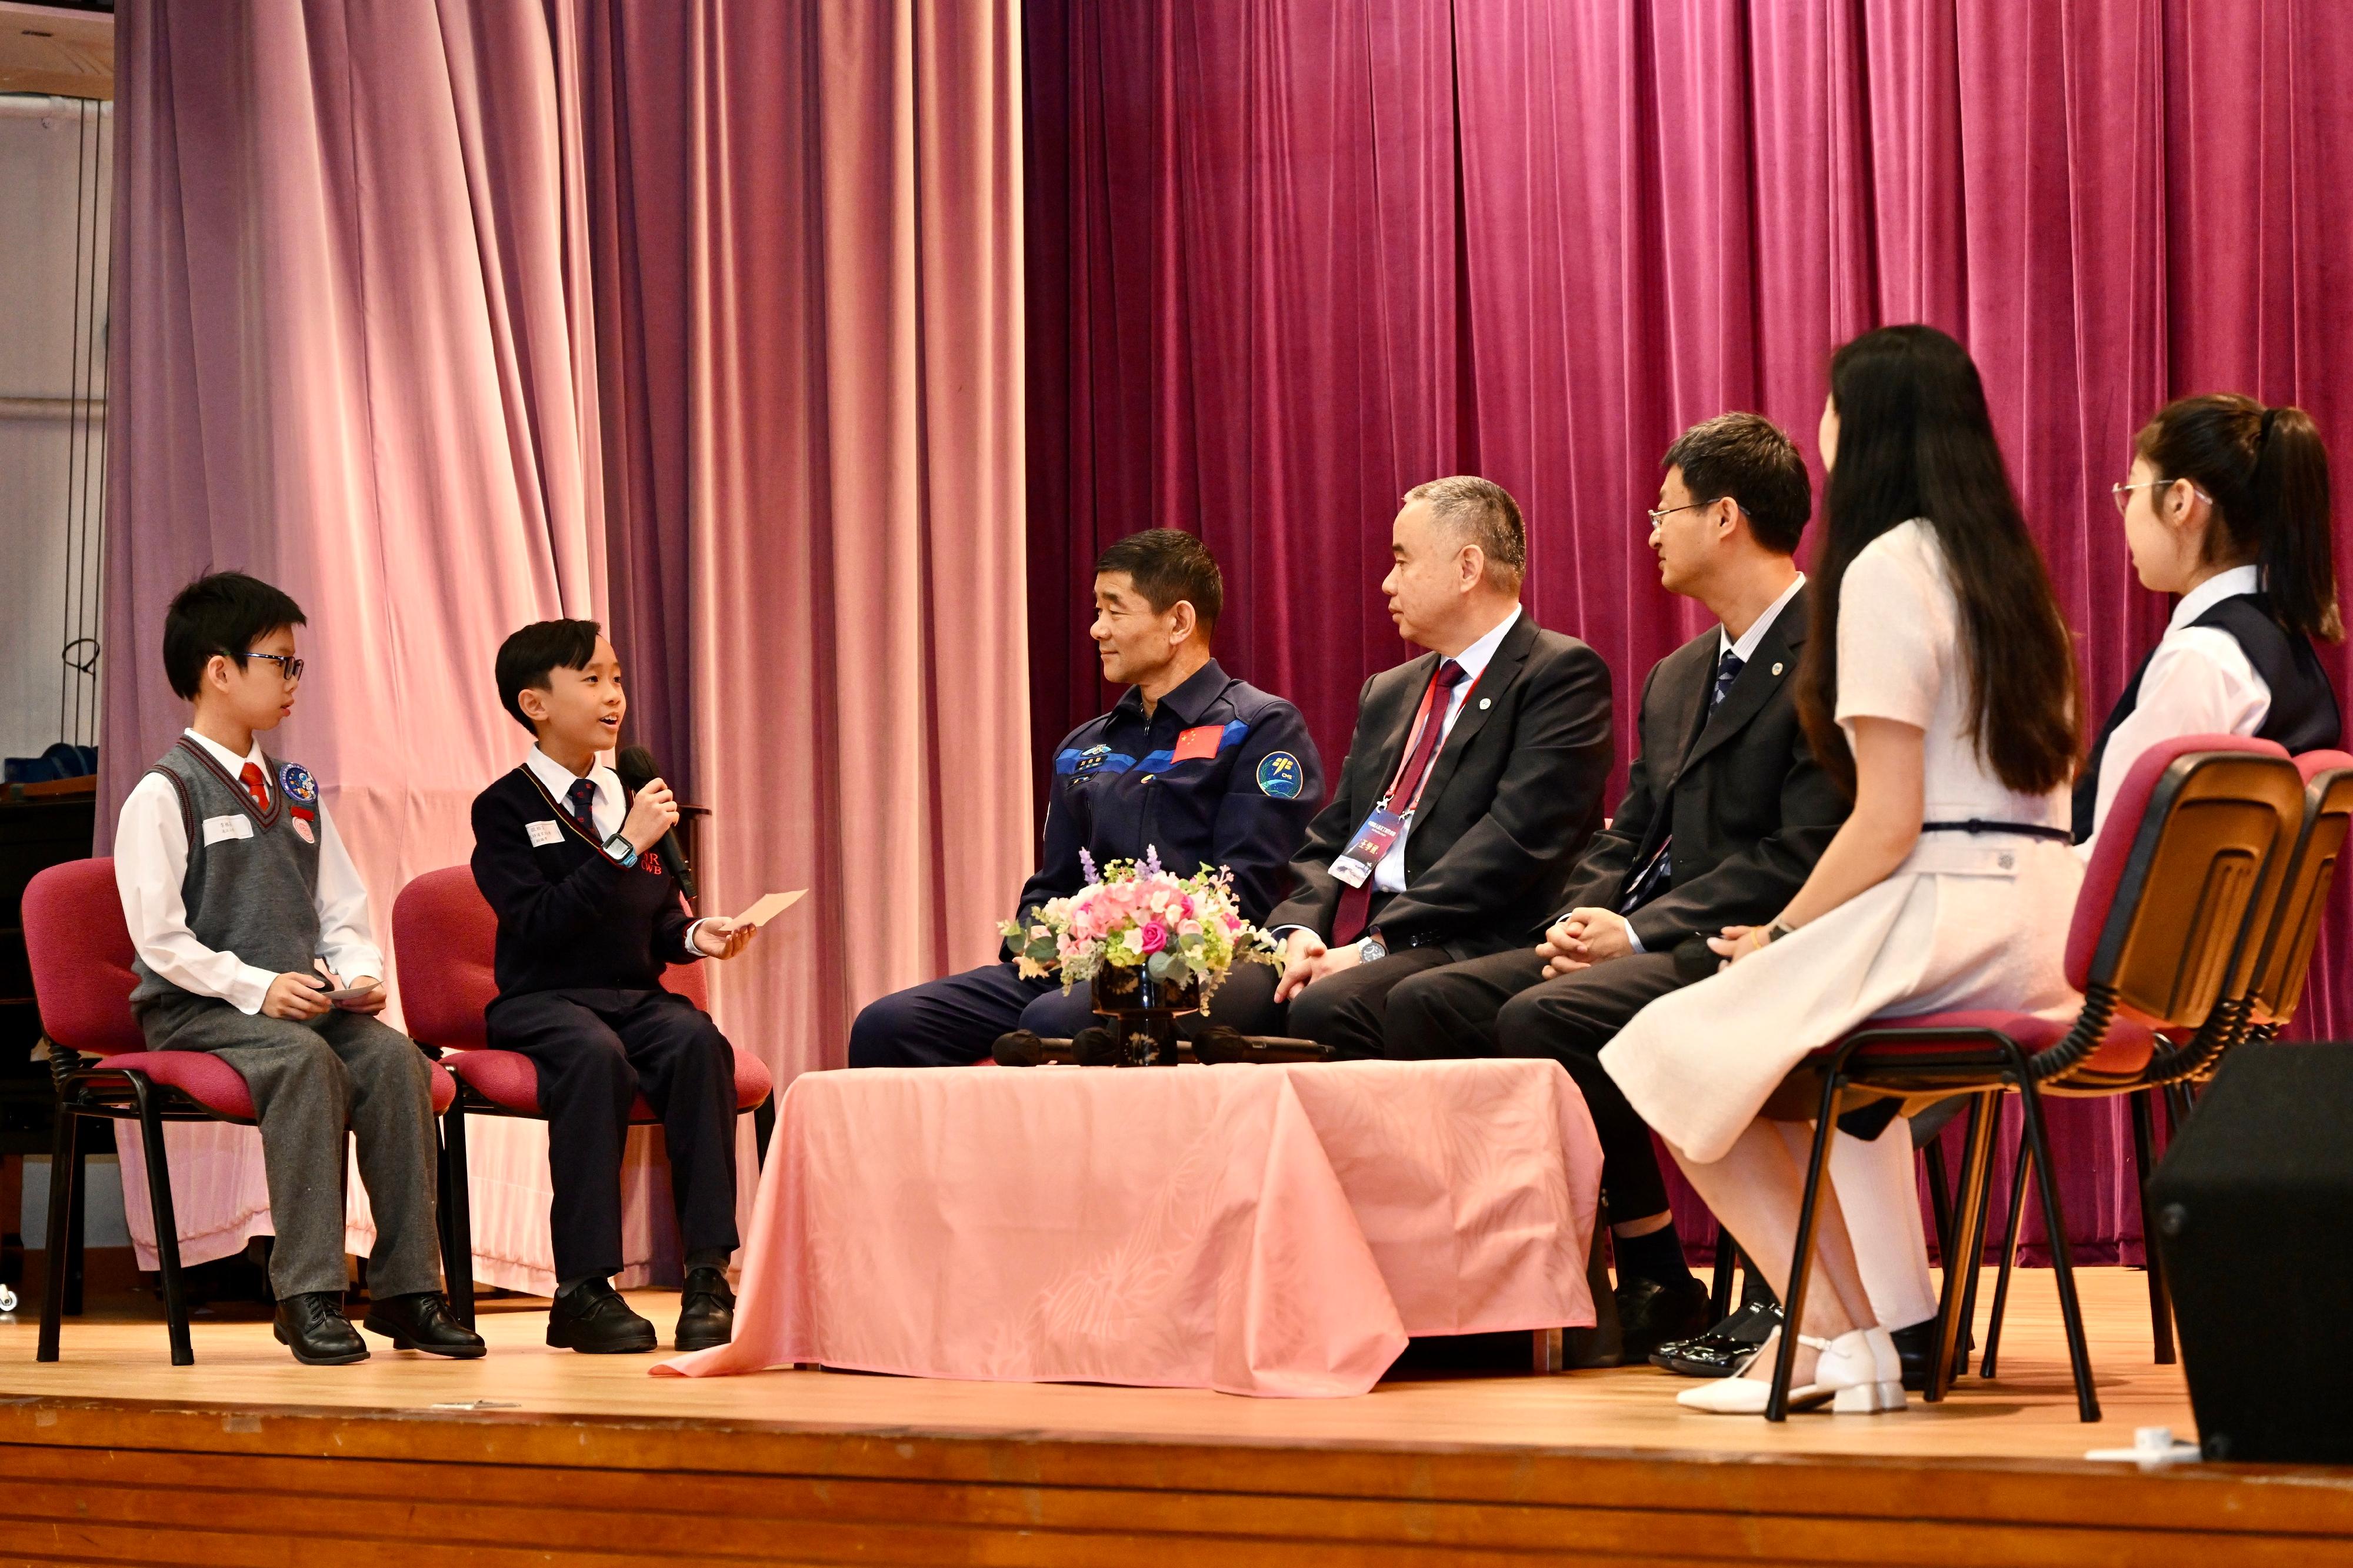 The China Manned Space delegation continued their visit in Hong Kong today (November 29). Photo shows (from third left) Shenzhou-12 astronaut Mr Liu Boming, and delegation members Mr Wang Xuewu and Mr Zhong Hongen, attending a dialogue session with students at Ma Tau Chung Government Primary School (Hung Hom Bay).